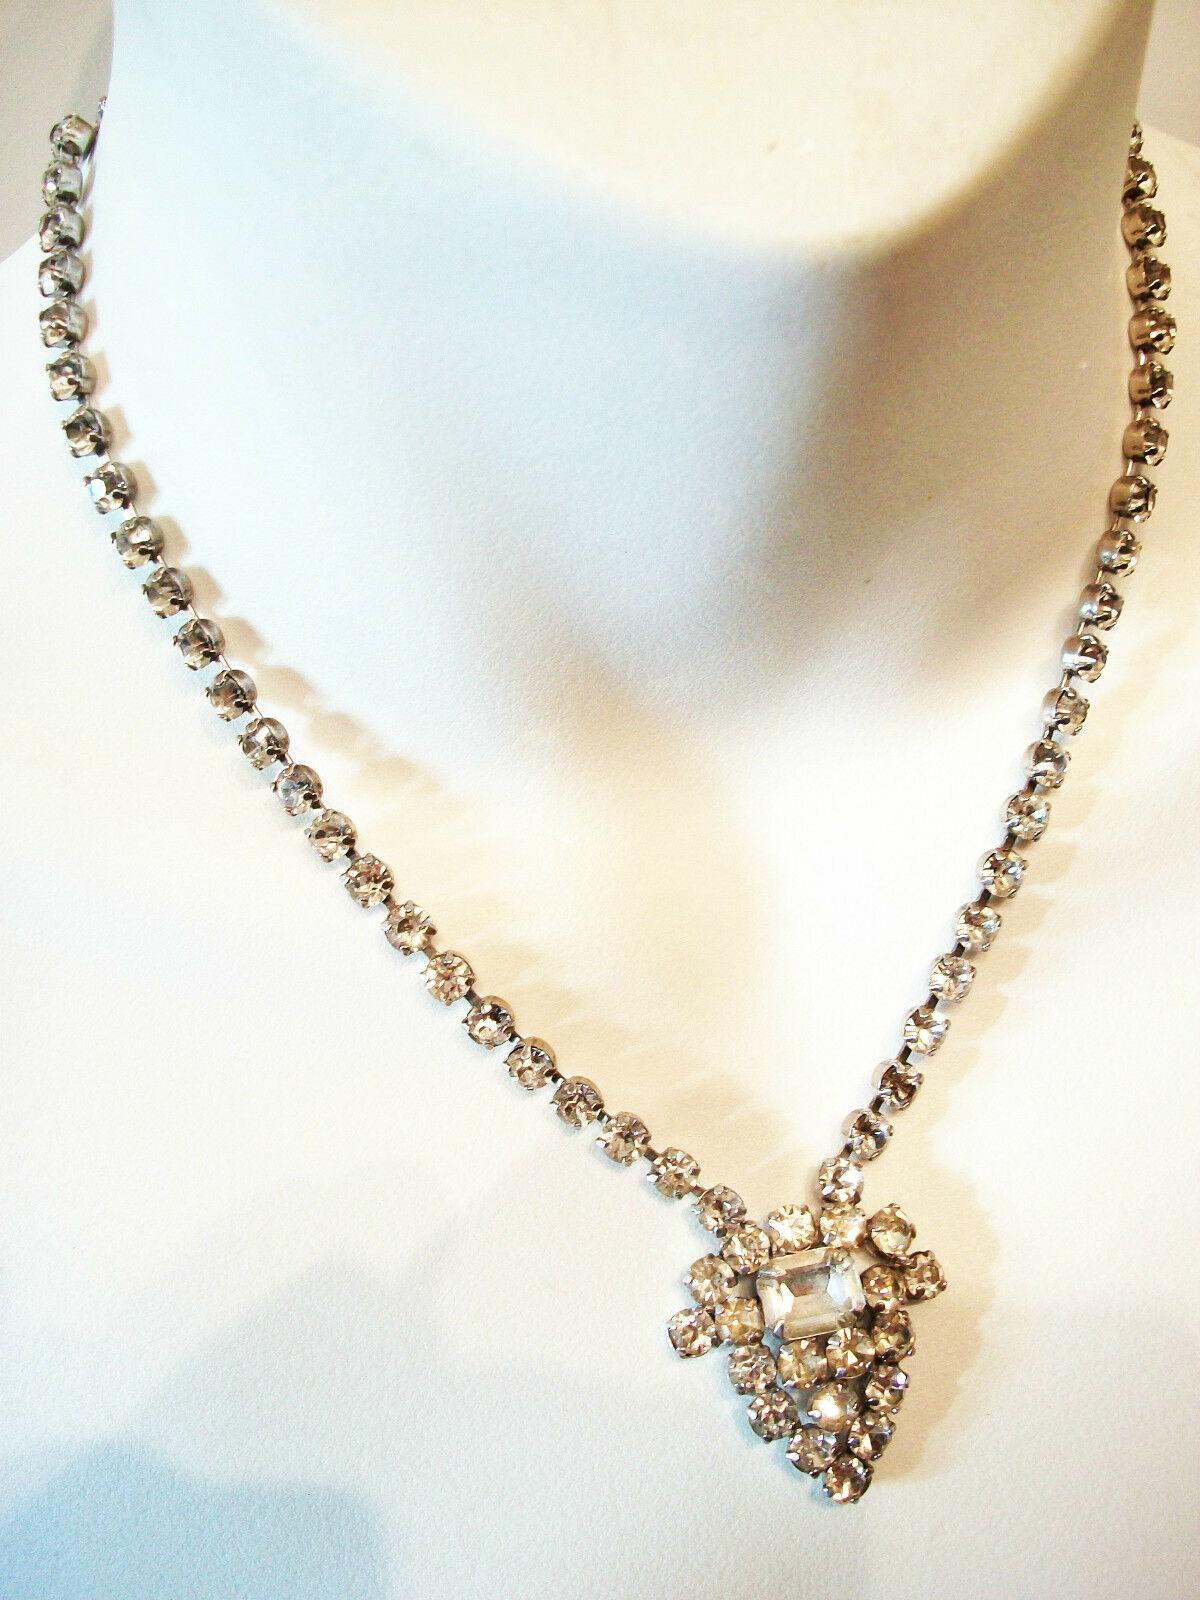 Jay Flex, Antique Art Deco Sterling Silver & Rhinestone Necklace, circa 1930s In Good Condition For Sale In Chatham, CA